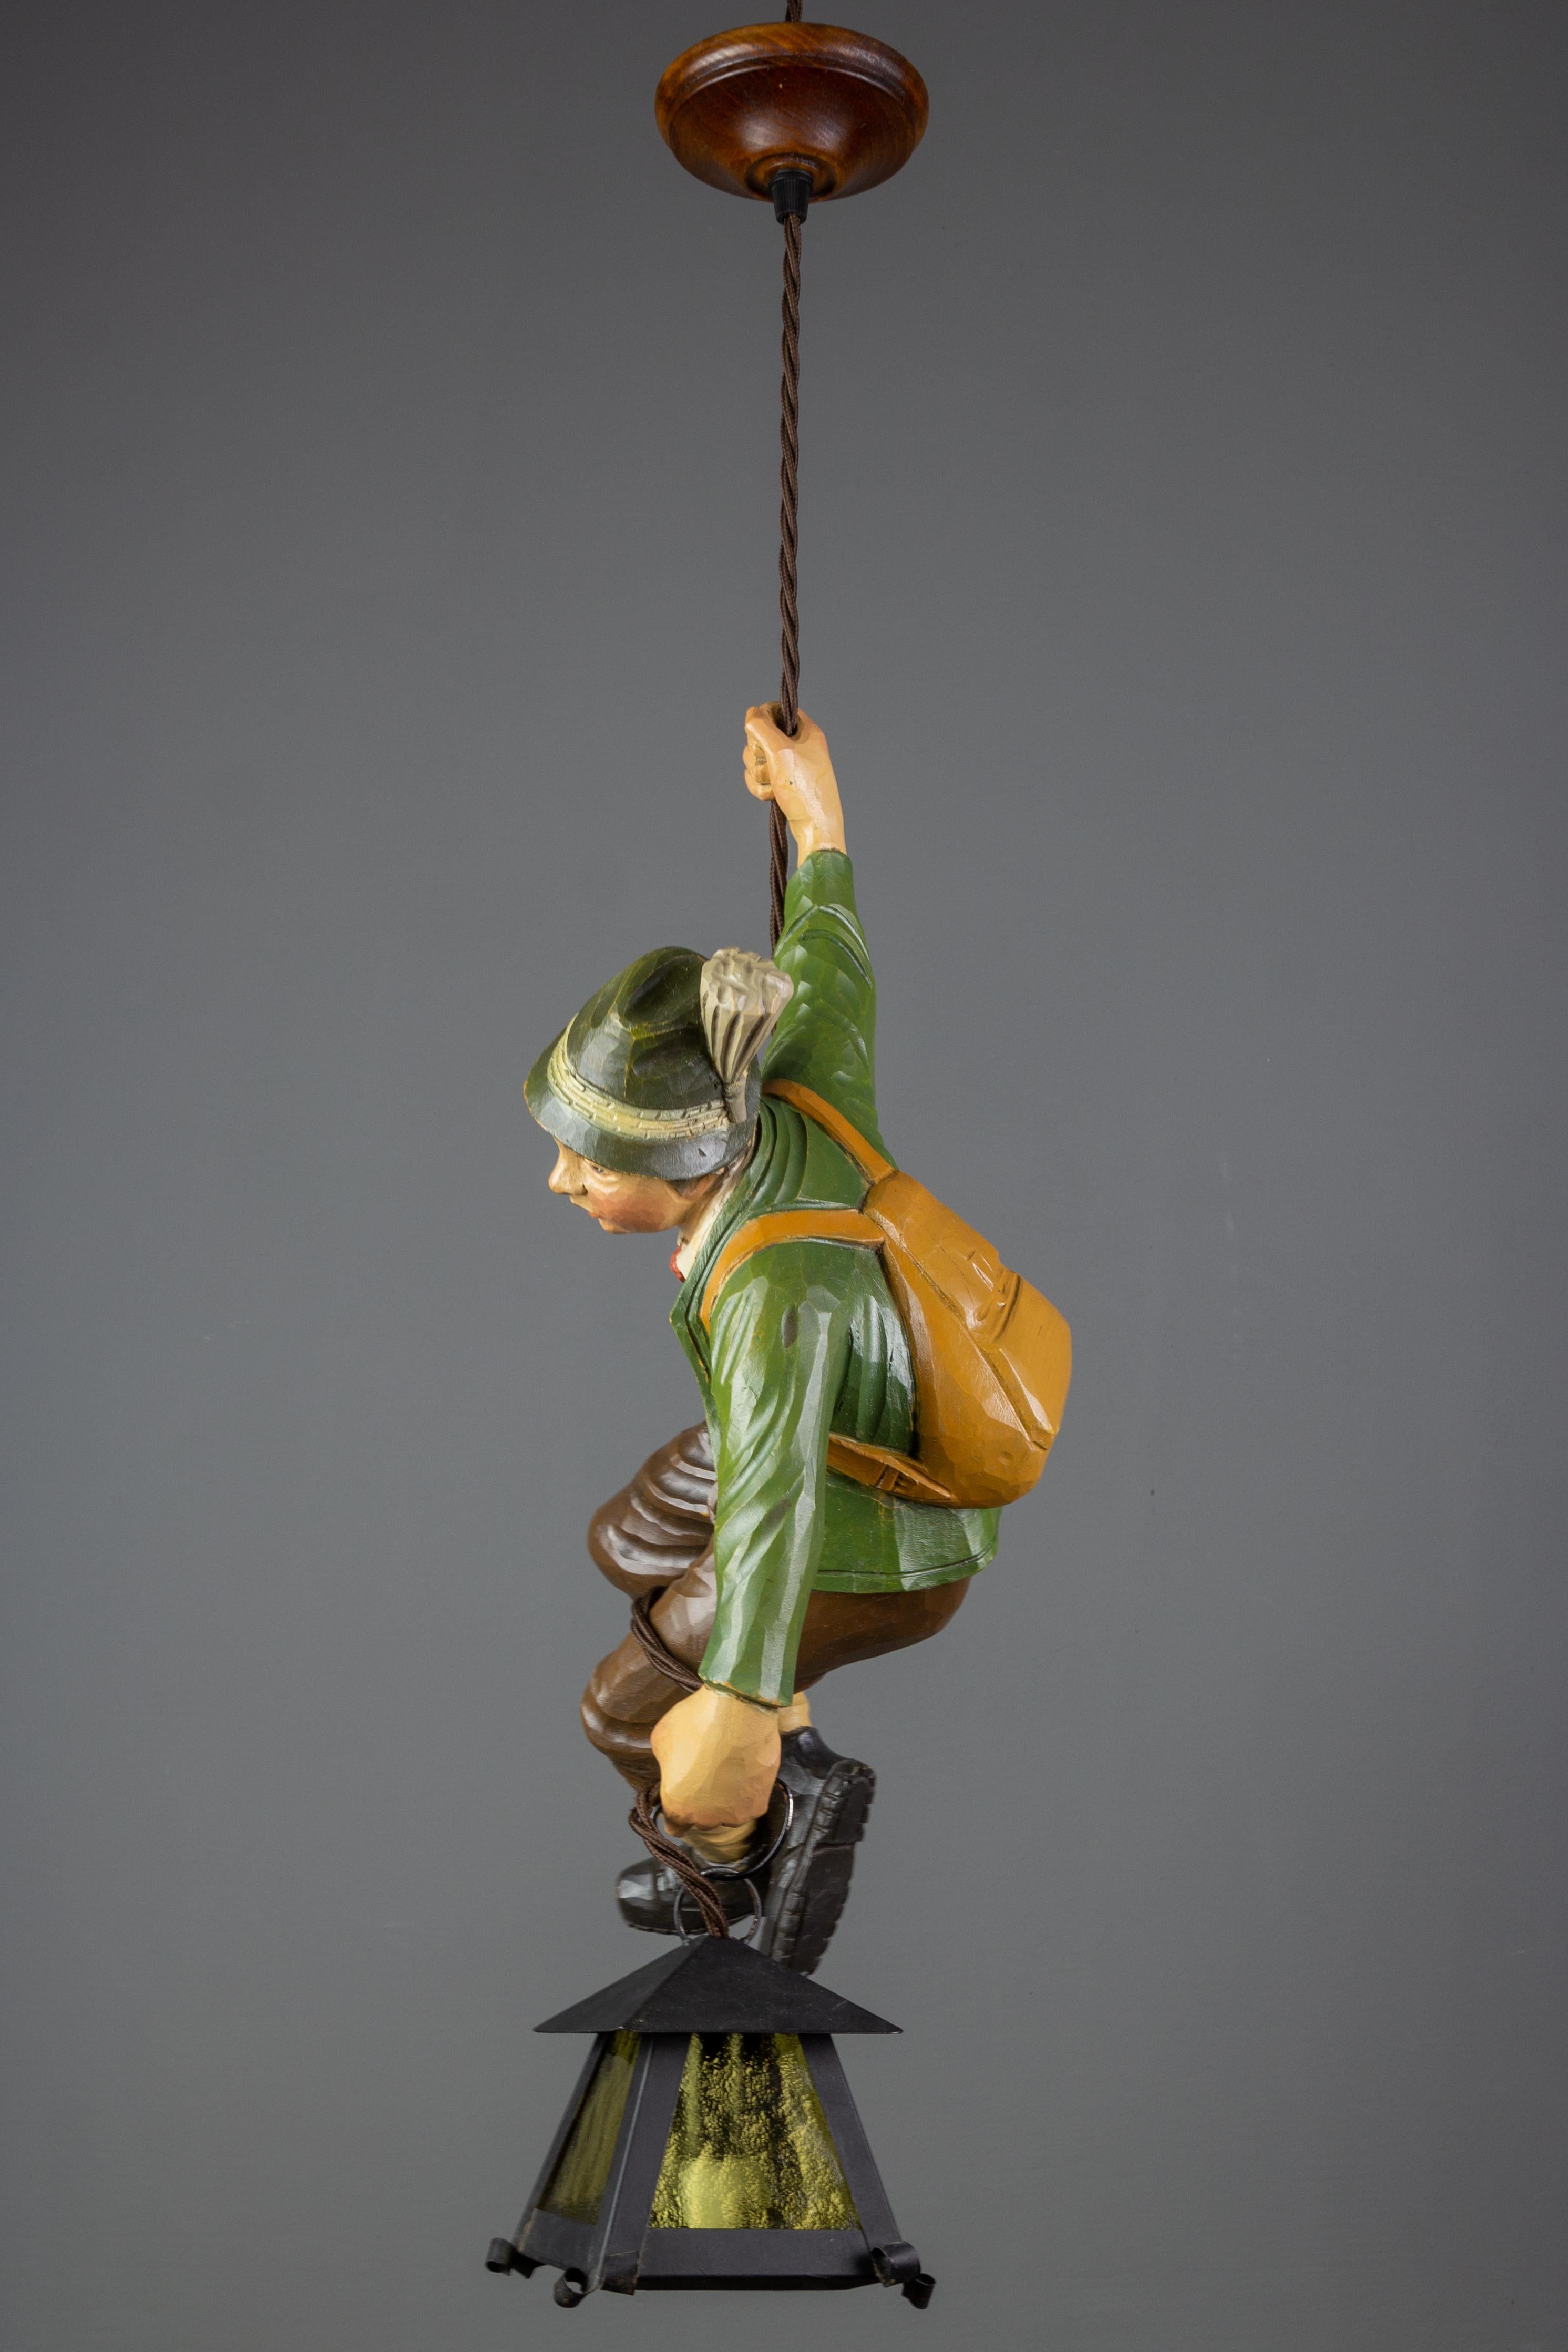 Mid-20th Century German Pendant Light with Hand Carved Mountain Climber Sculpture and Lantern